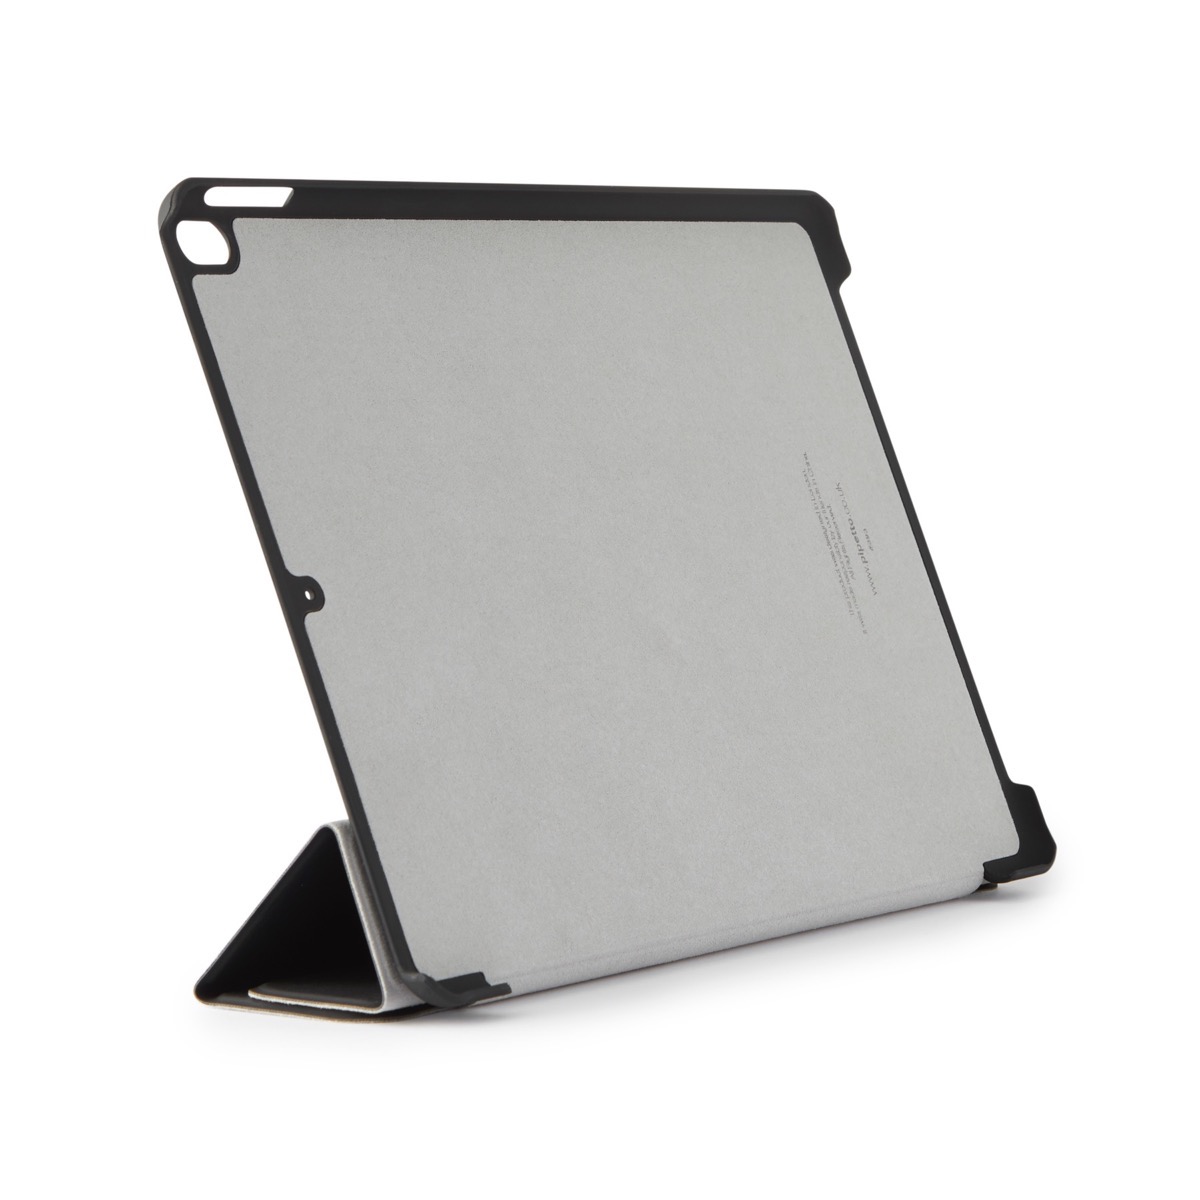 Au 1 Collection Select Pipetto Ipad Air 3rd 19 Origami Case Black 海外輸入ブランド商品 株式会社エム エス シー